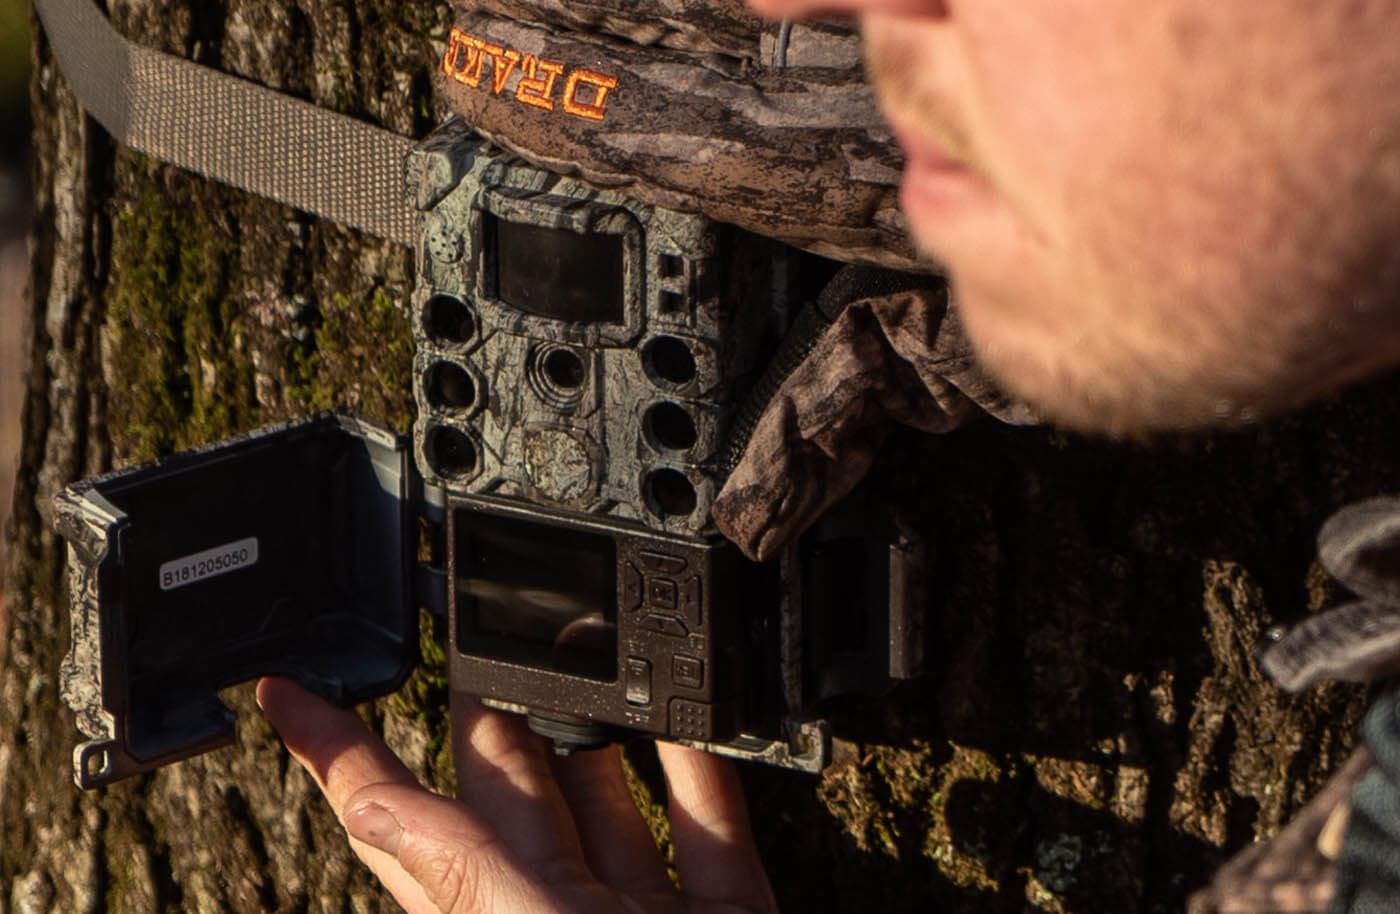 S-4K Trail Camera strapped to a tree in the woods